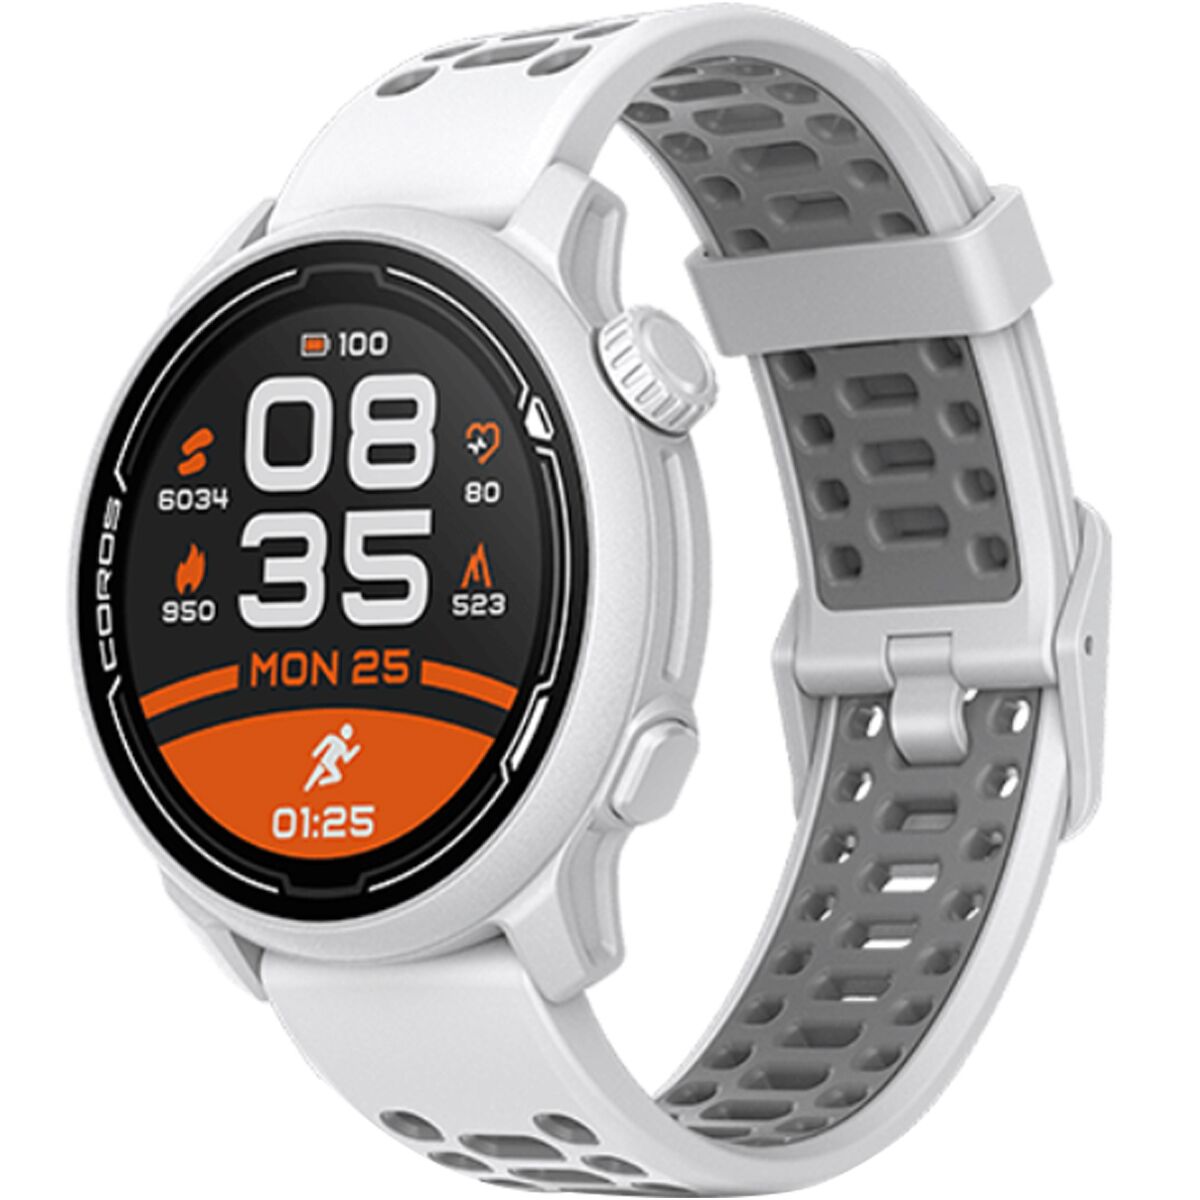 COROS Pace 2 Premium GPS Sport Watch Review - Believe in the Run